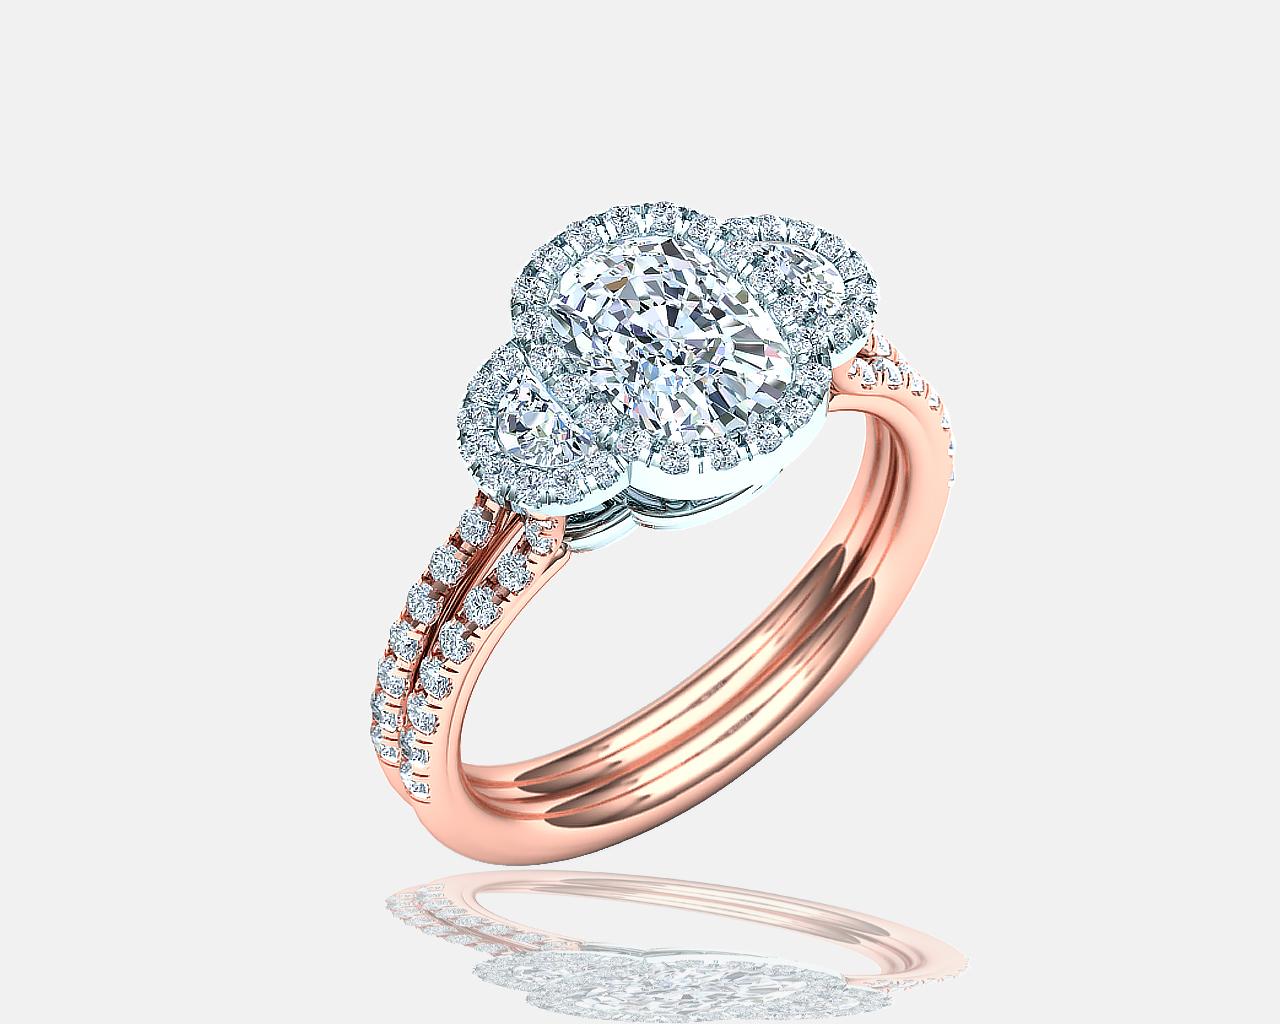 This beautiful three-stone diamond ring has a modern twist on a classicaly-inspired ring.  Taking a typical three-stone ring and adding an inclusive diamond halo makes this ring immediately different.  The center stone diamond is an EGL USA